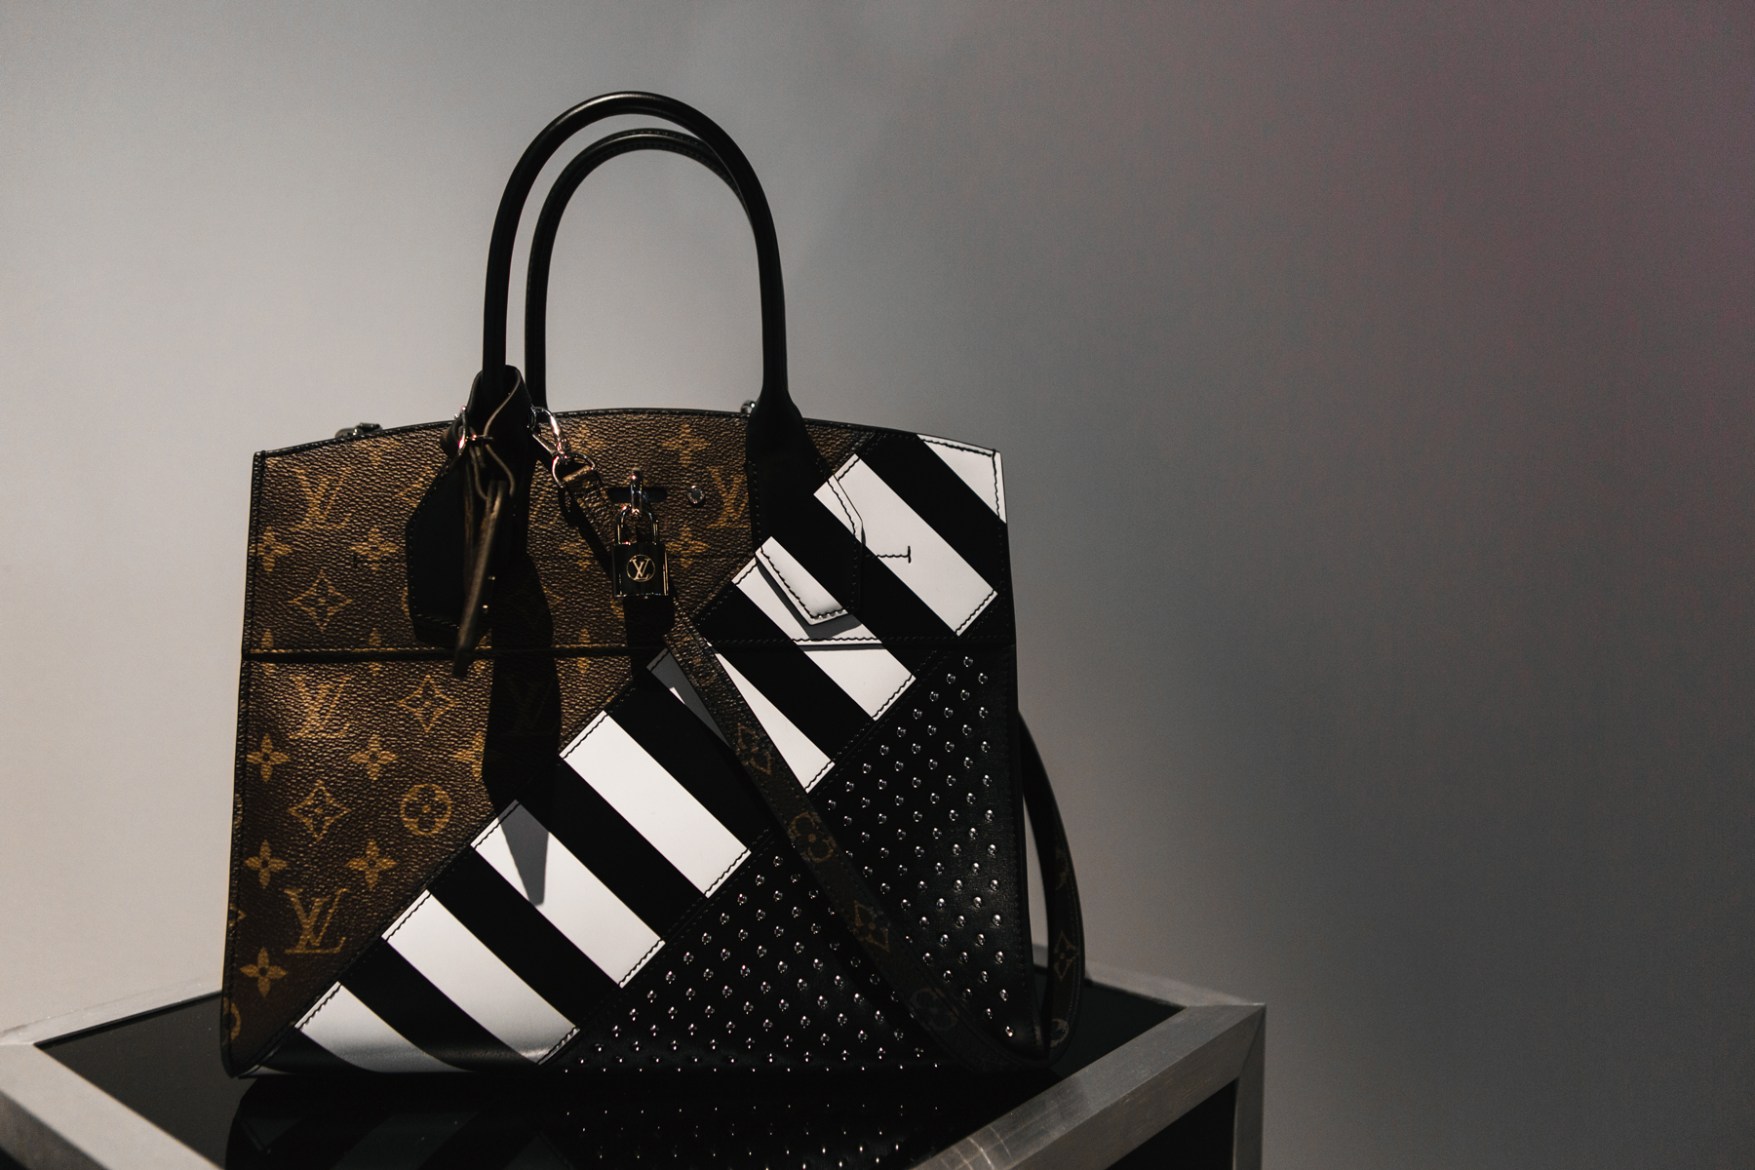 Fake Louis Vuitton luxury bag operation in China worth US$15.4